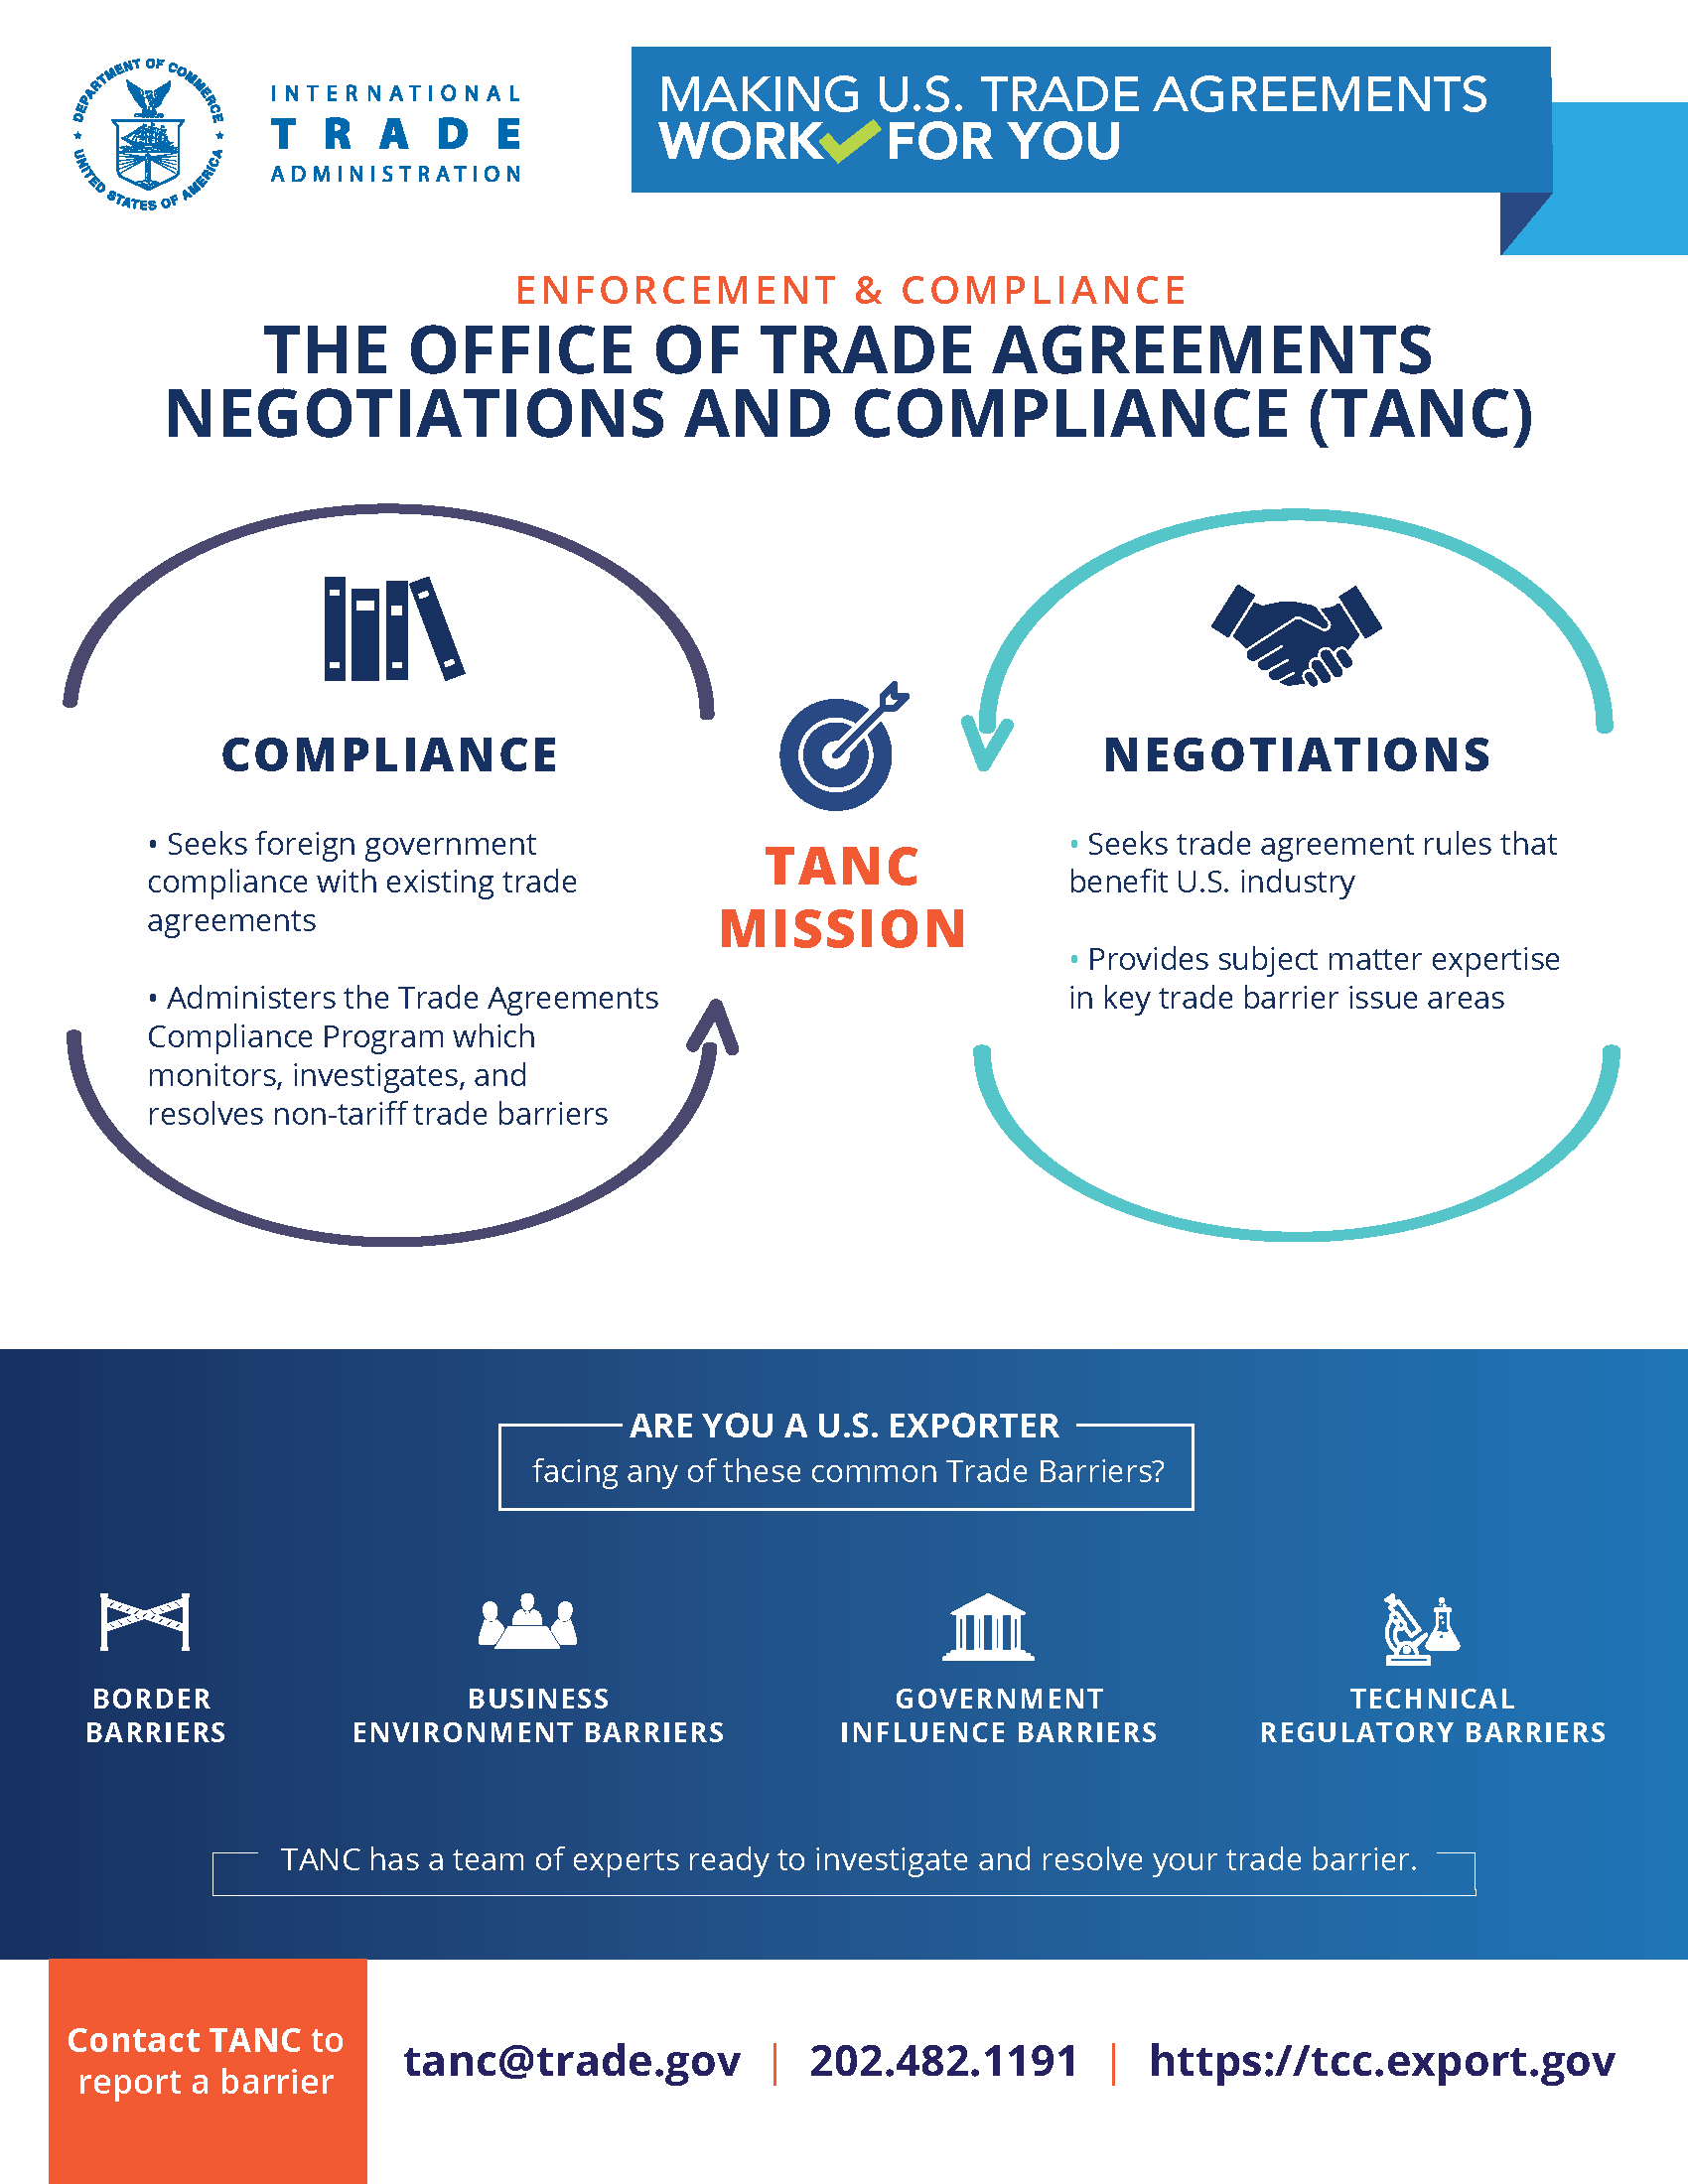 An infographic explaining the links between trade agreement negotiations and compliance for the TANC office